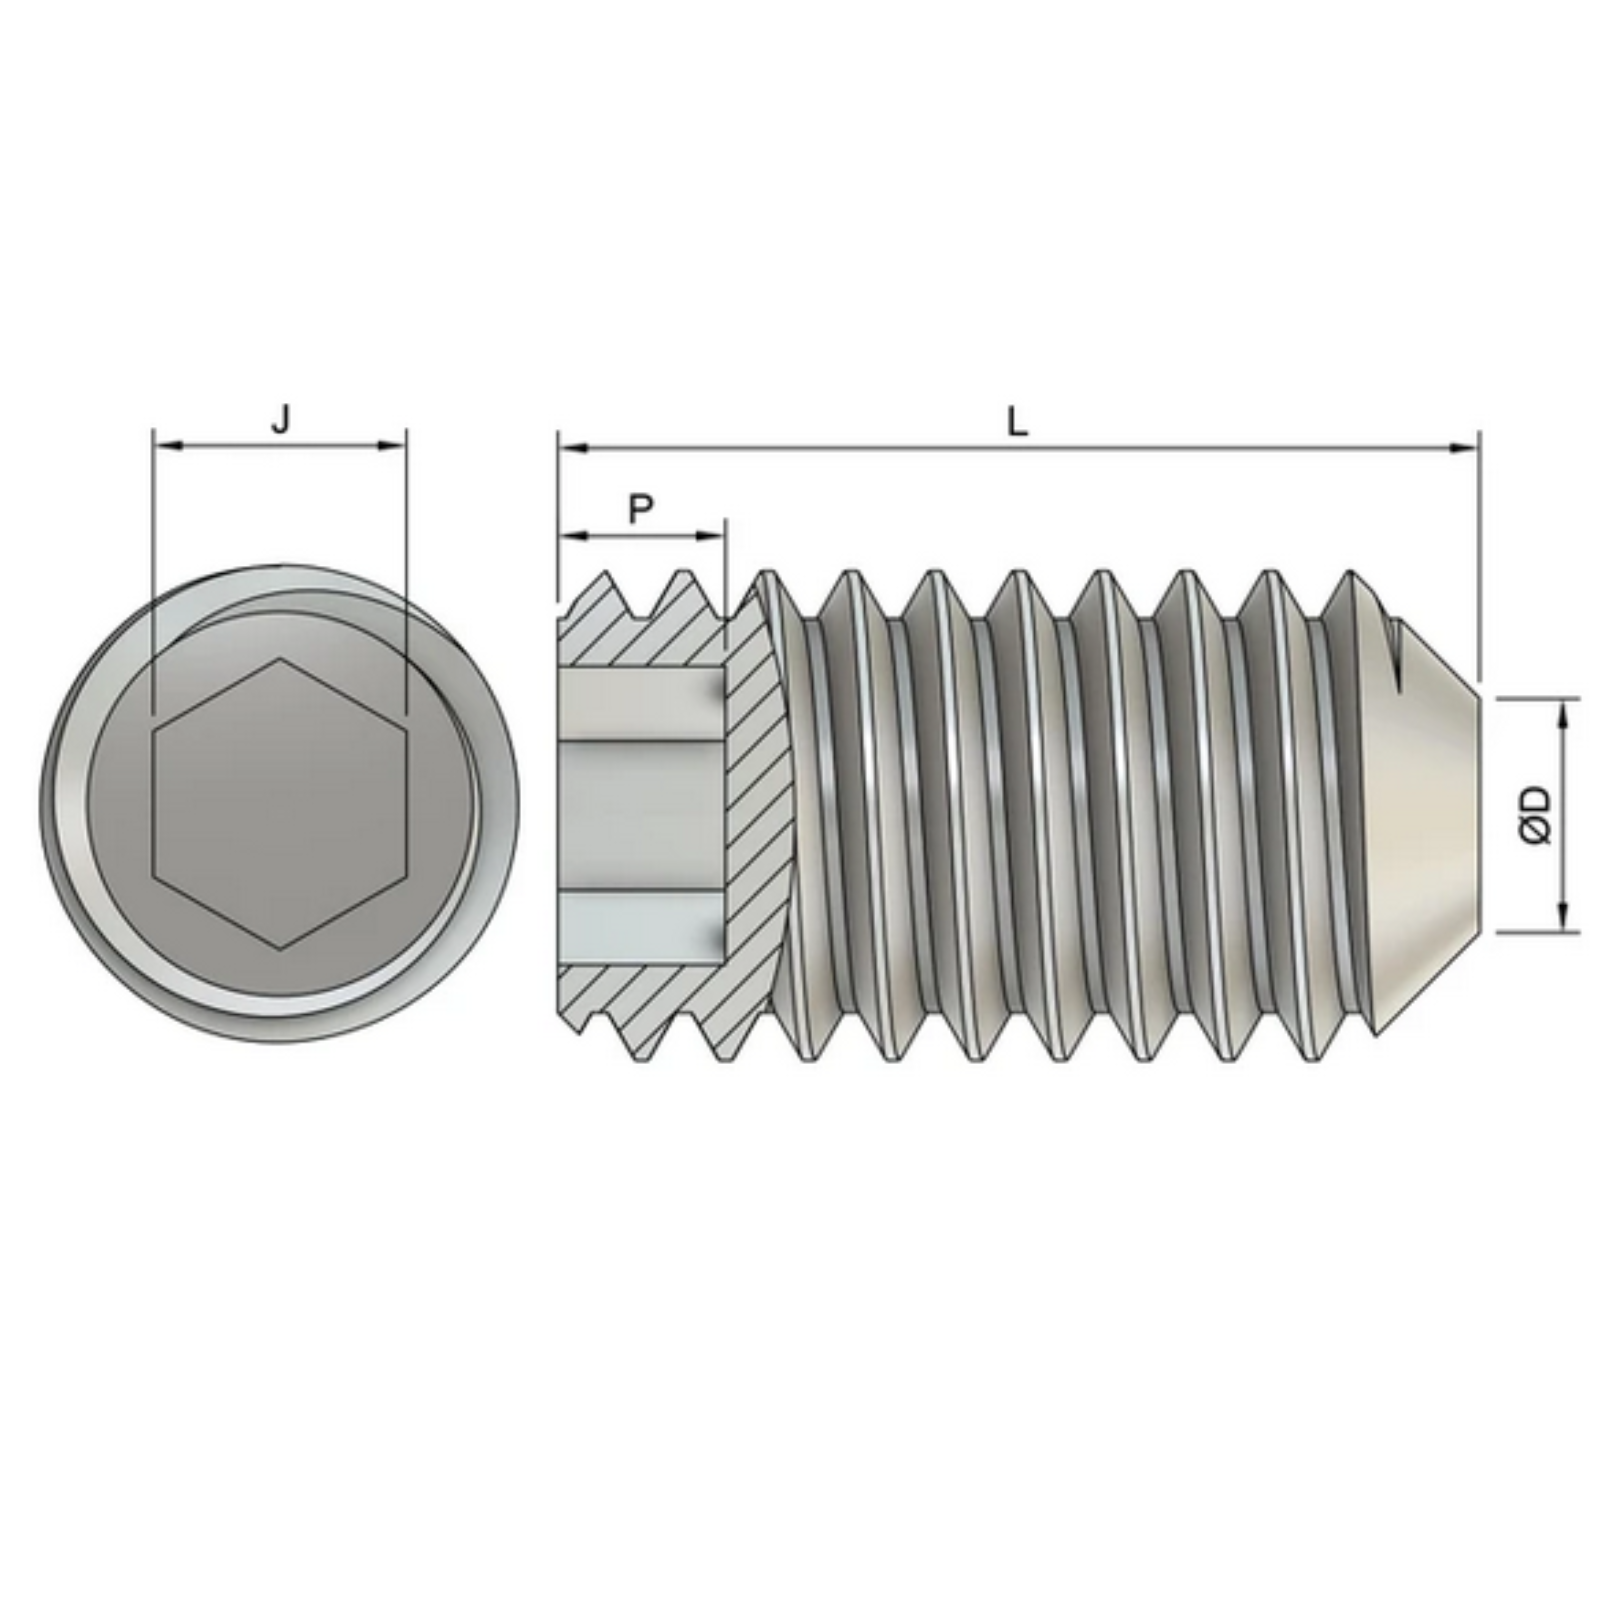 M4 Cup Point Set / Grub Screws (DIN 916) - Stainless Steel (A2)